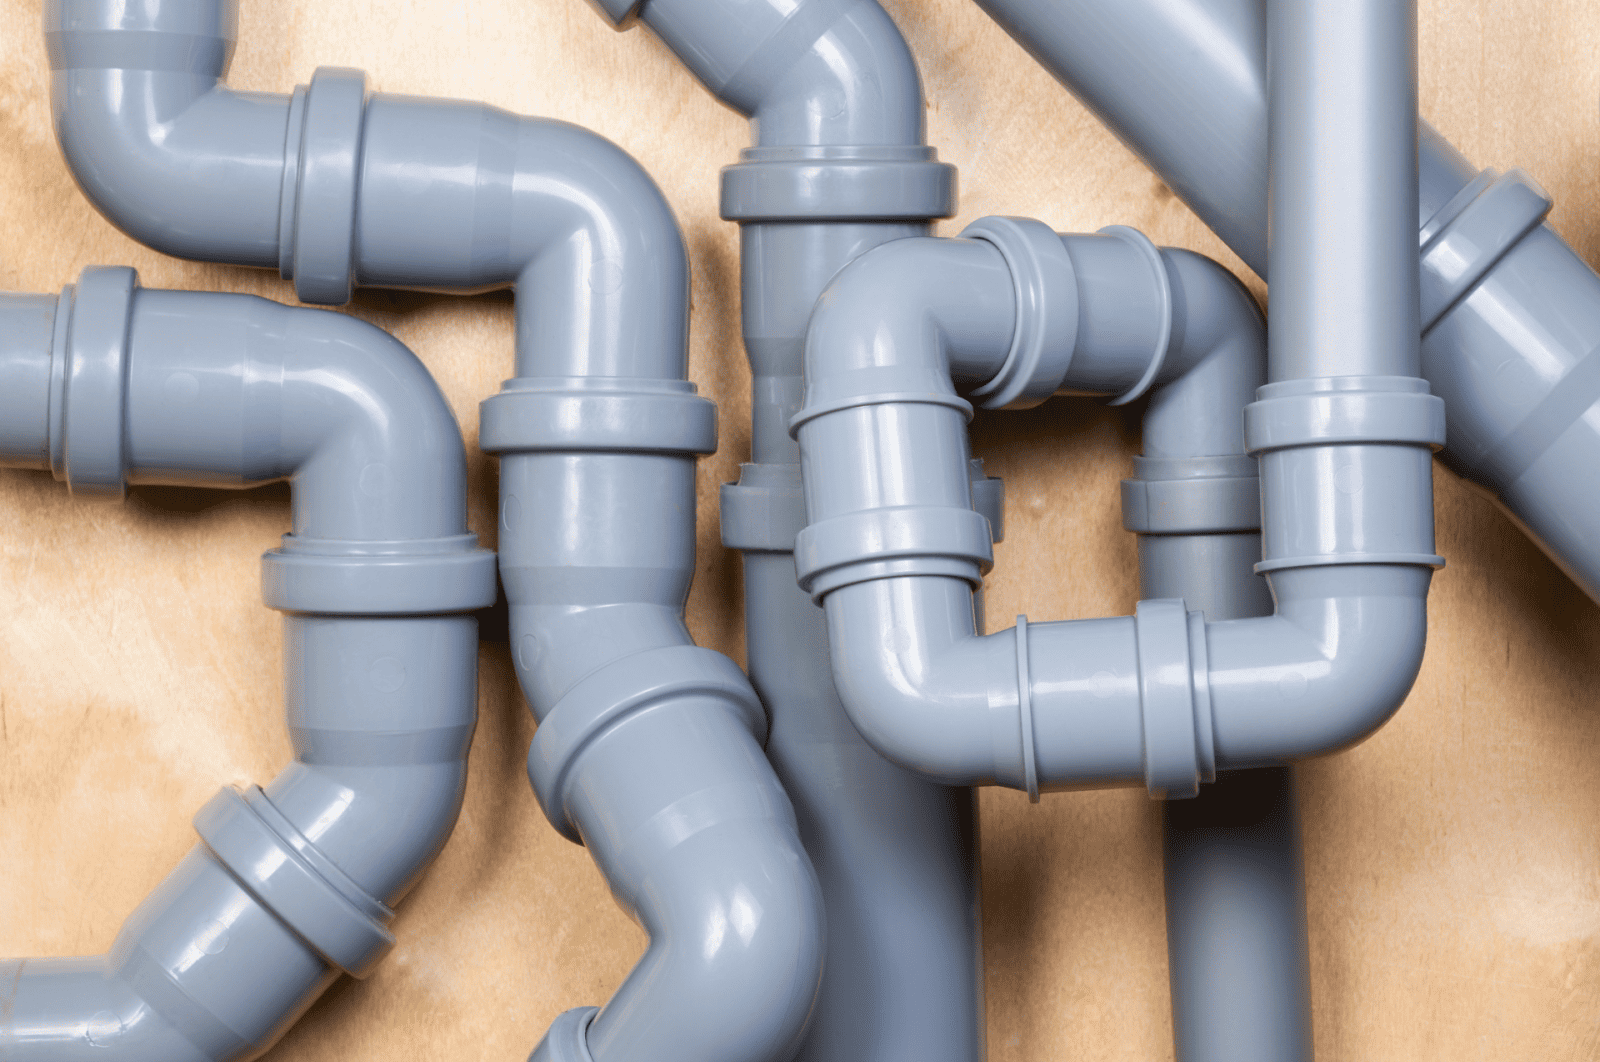 A series of new household water pipes